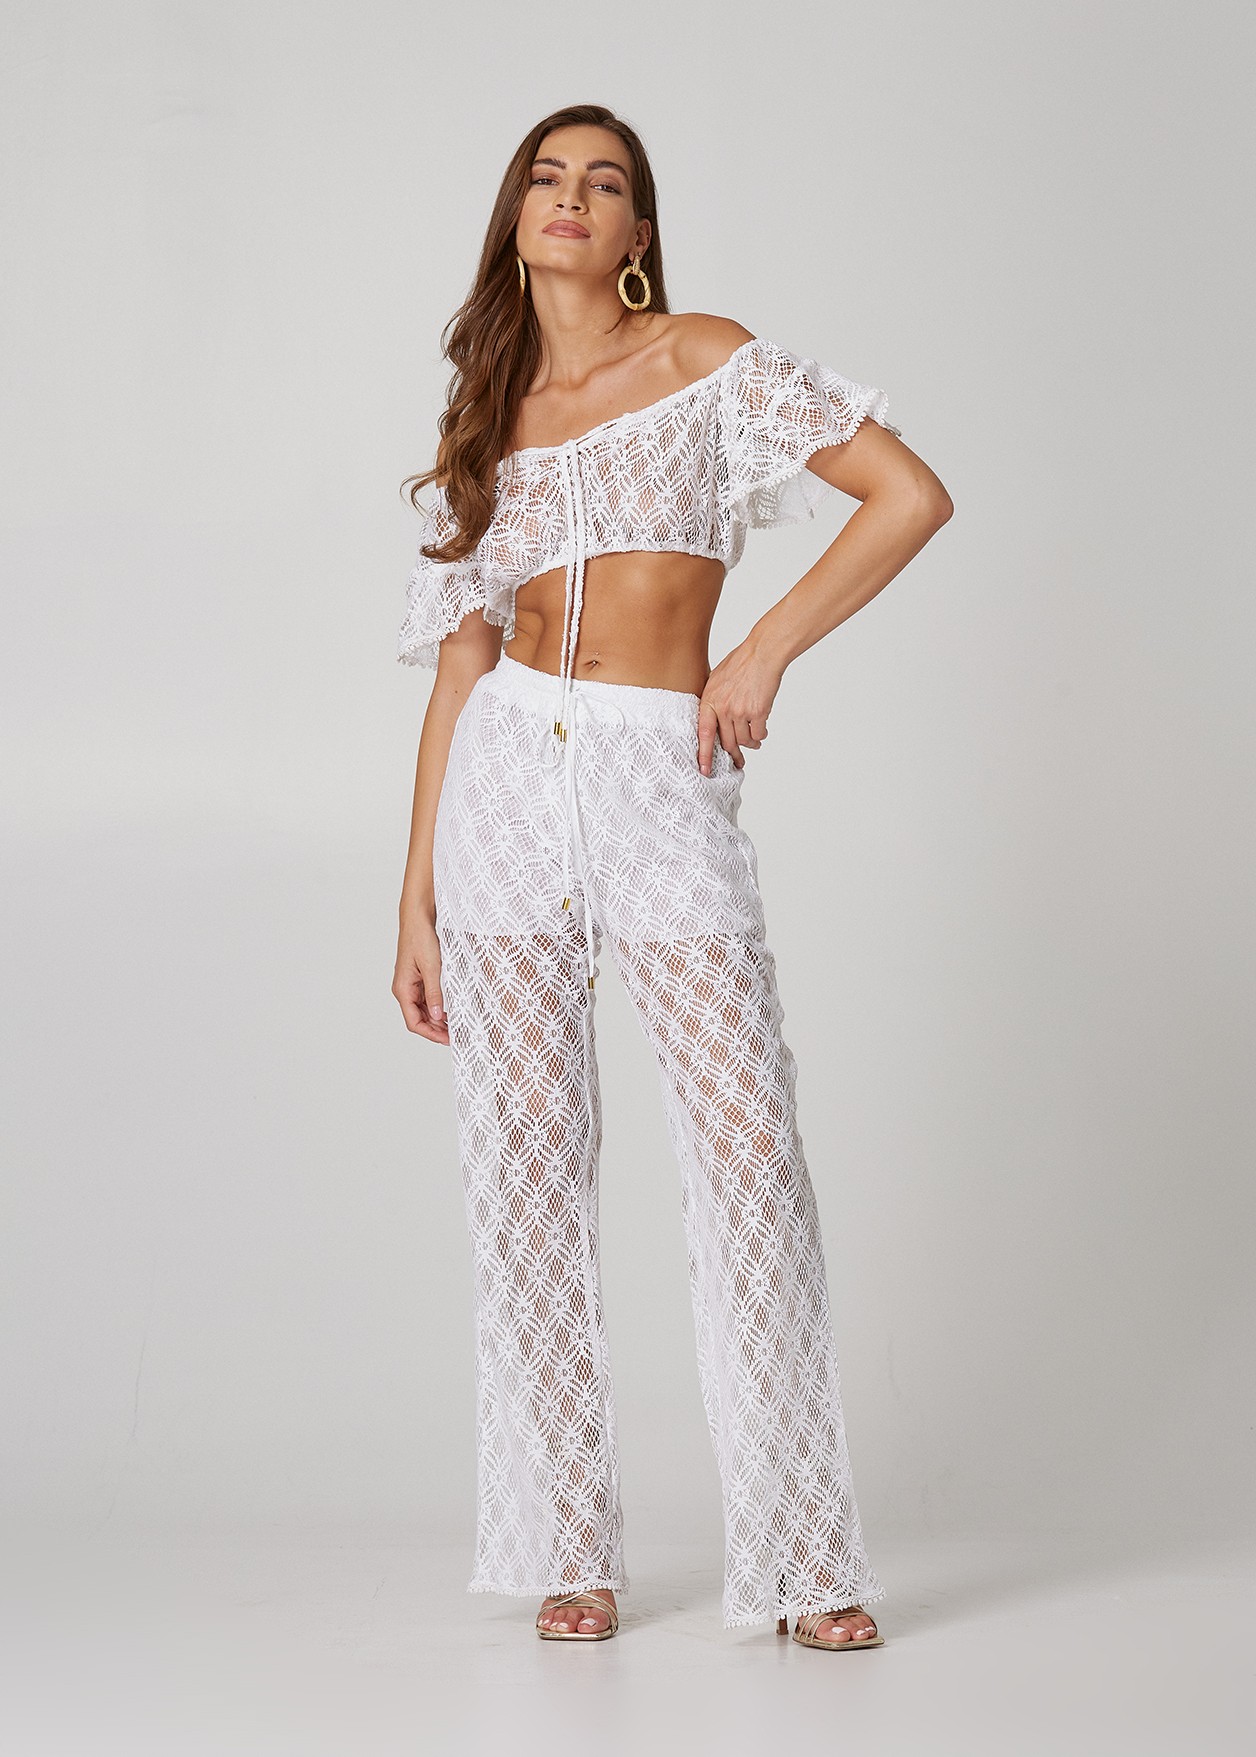 MIKAYLA LACE TROUSERS  Final saleno returns or refunds  Empowa Clothing